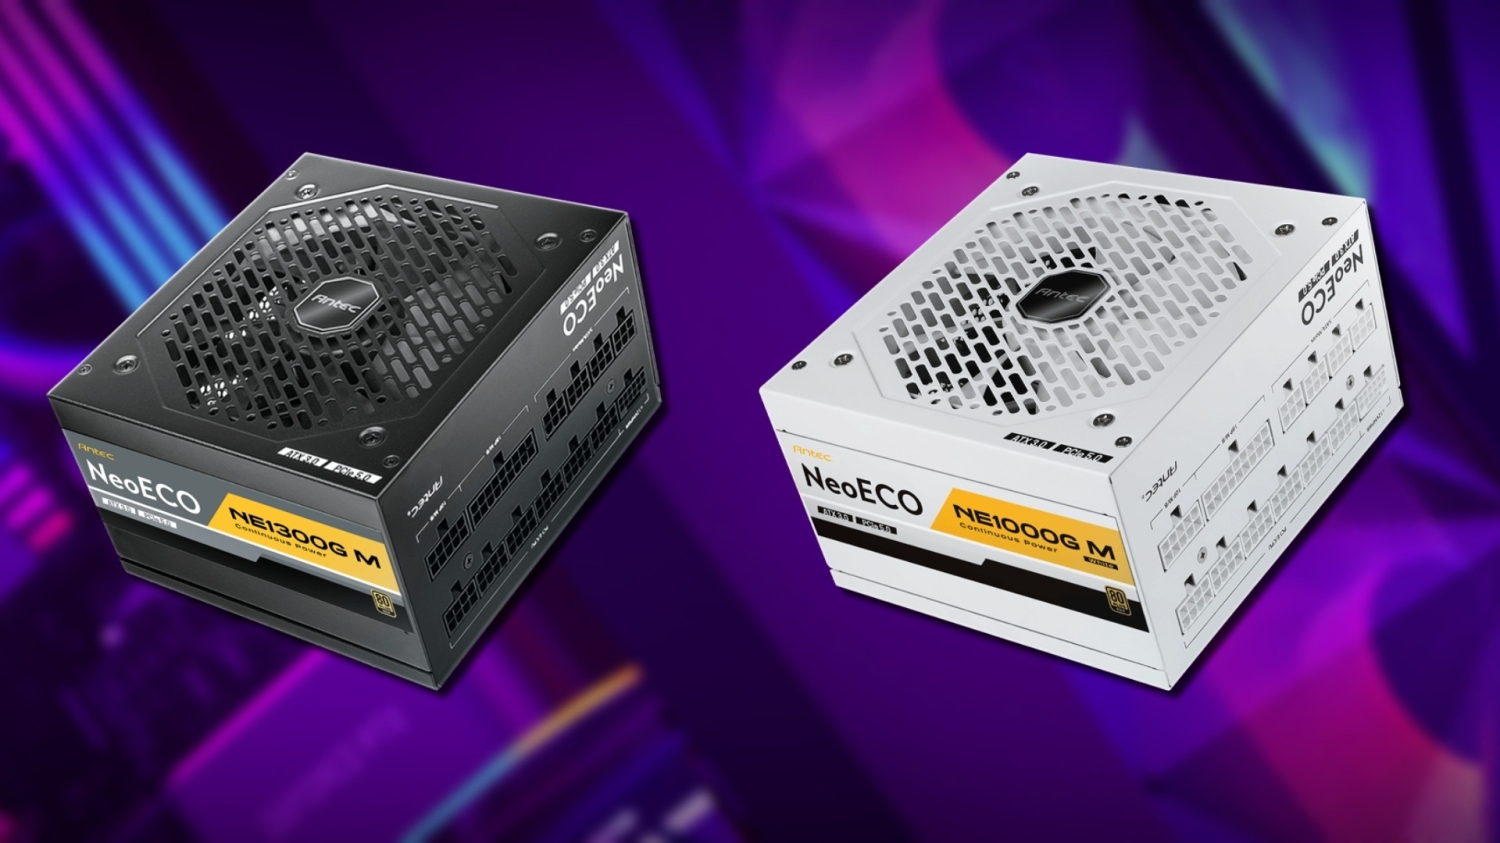 Antec's new NE Gold M ATX 3.0 power supplies are made for high-end 